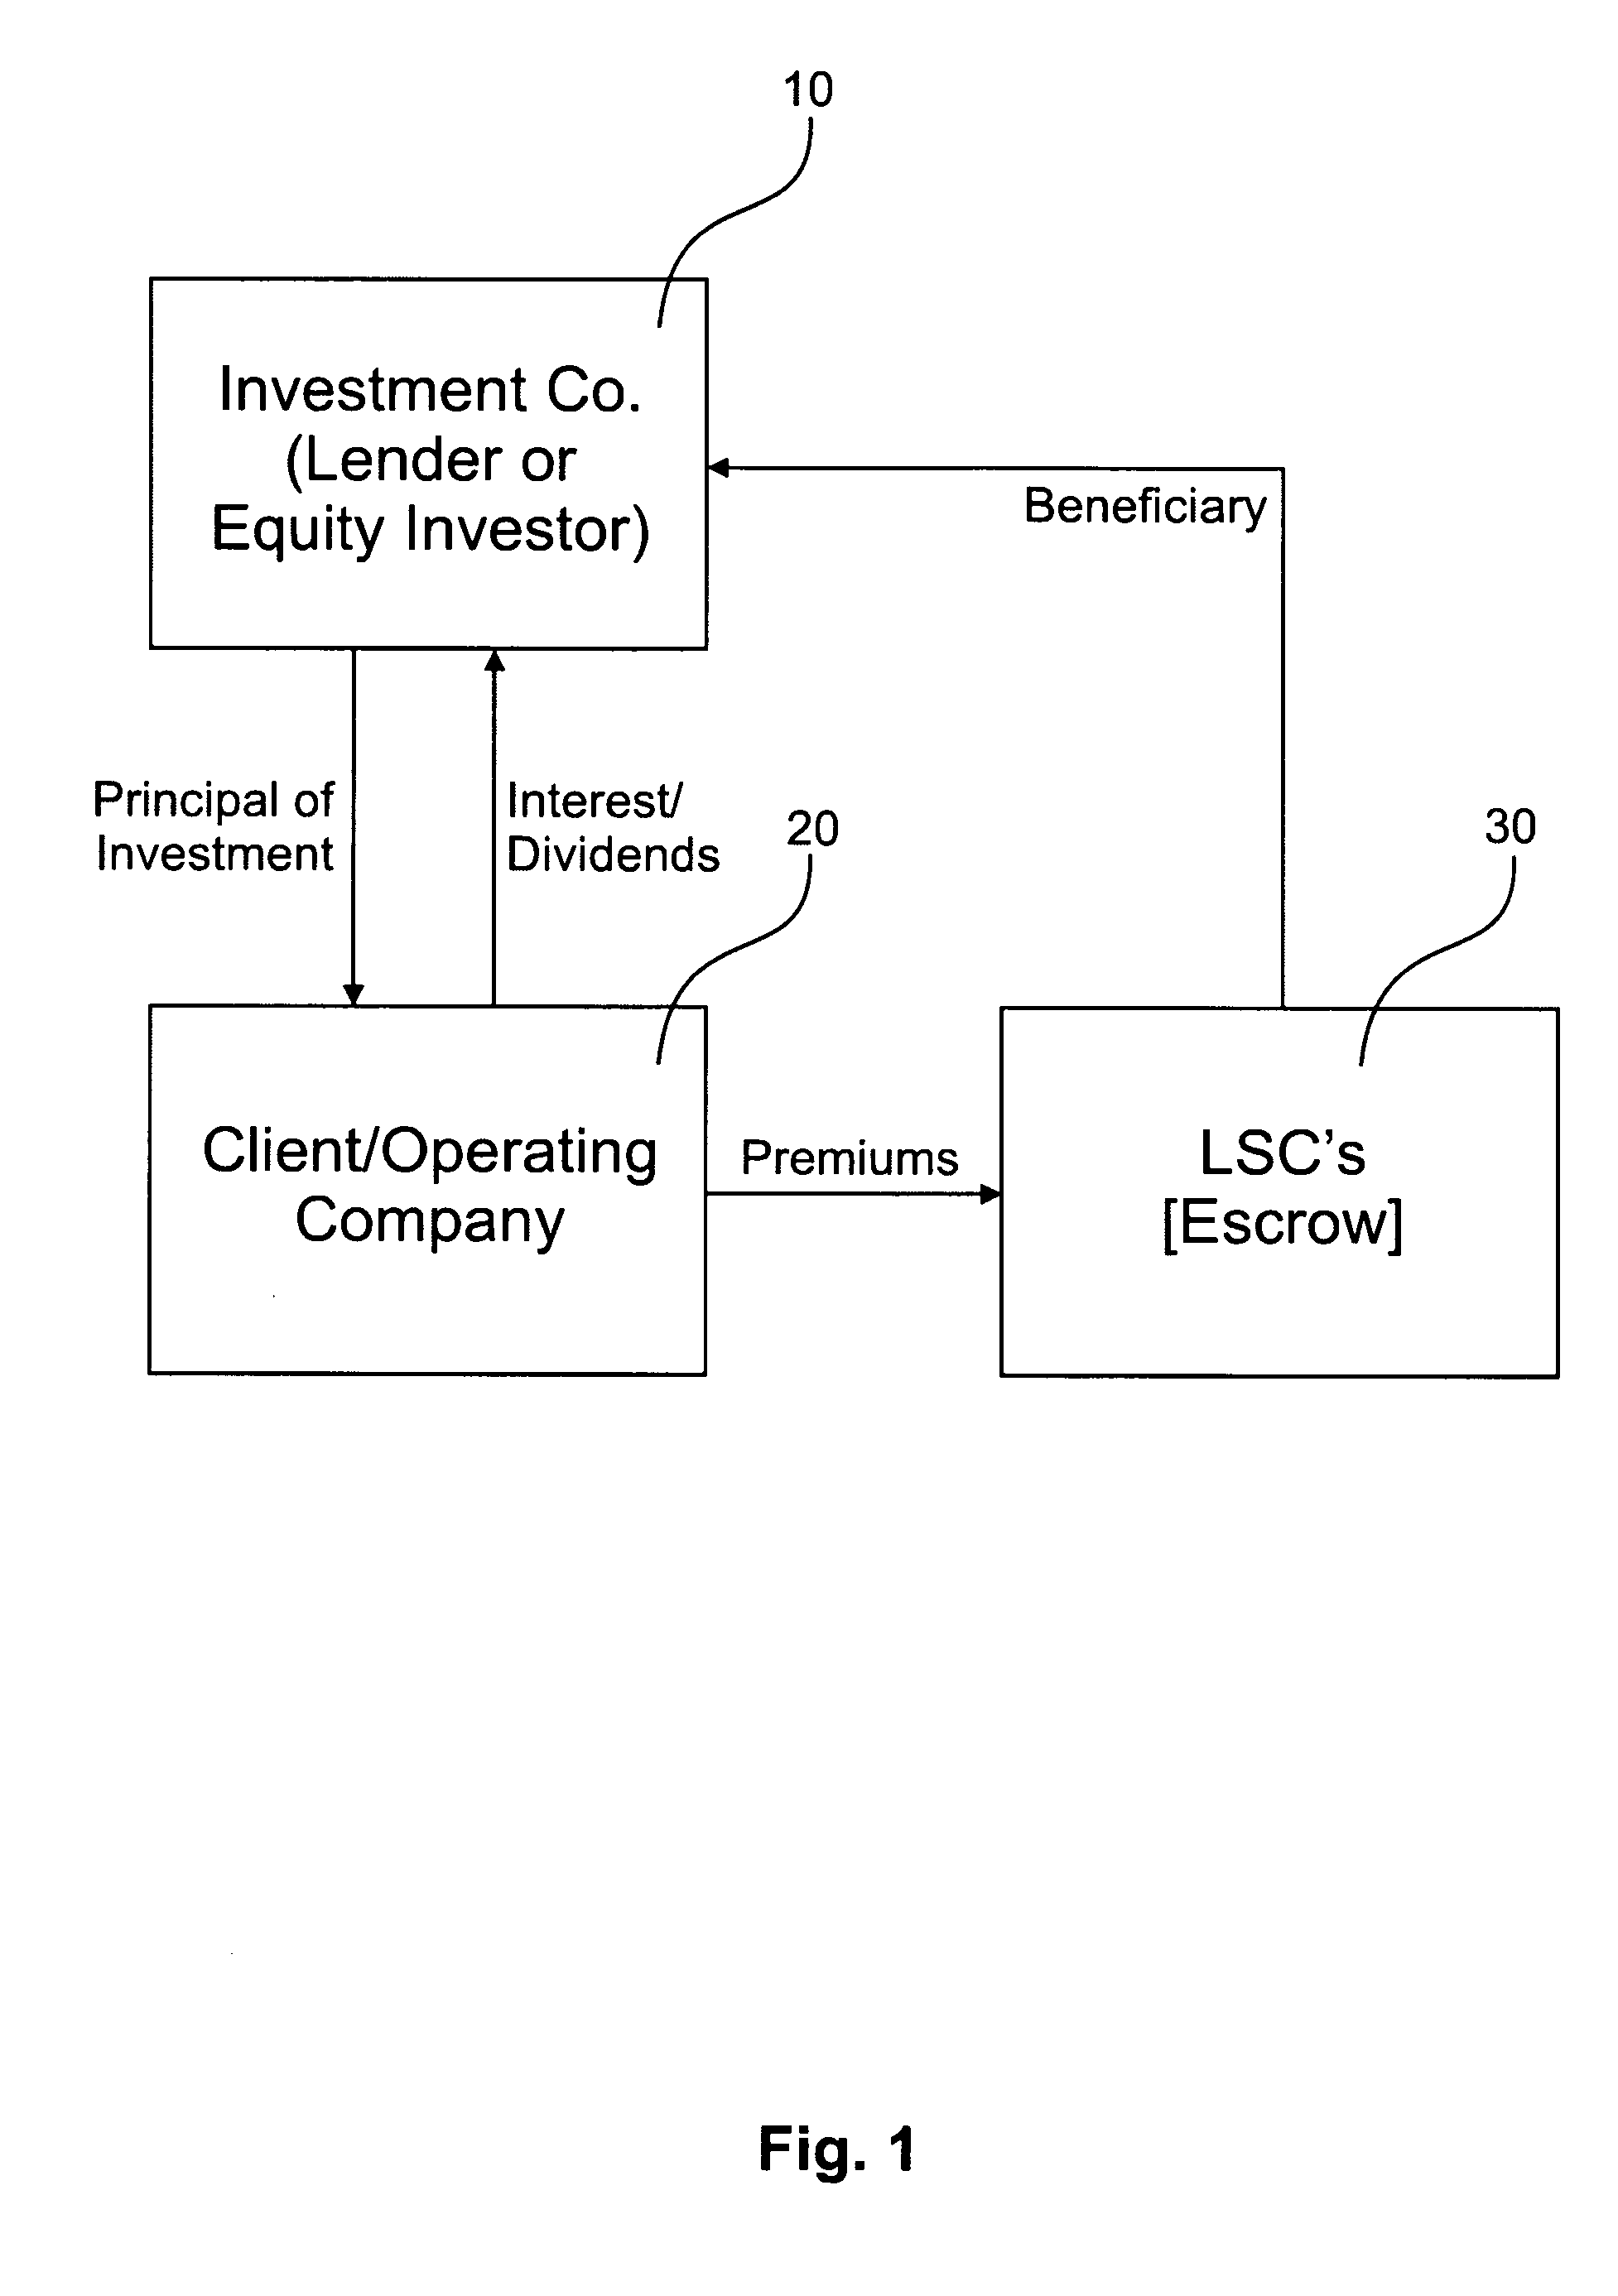 Life settlement contract based investment methods, systems, and products